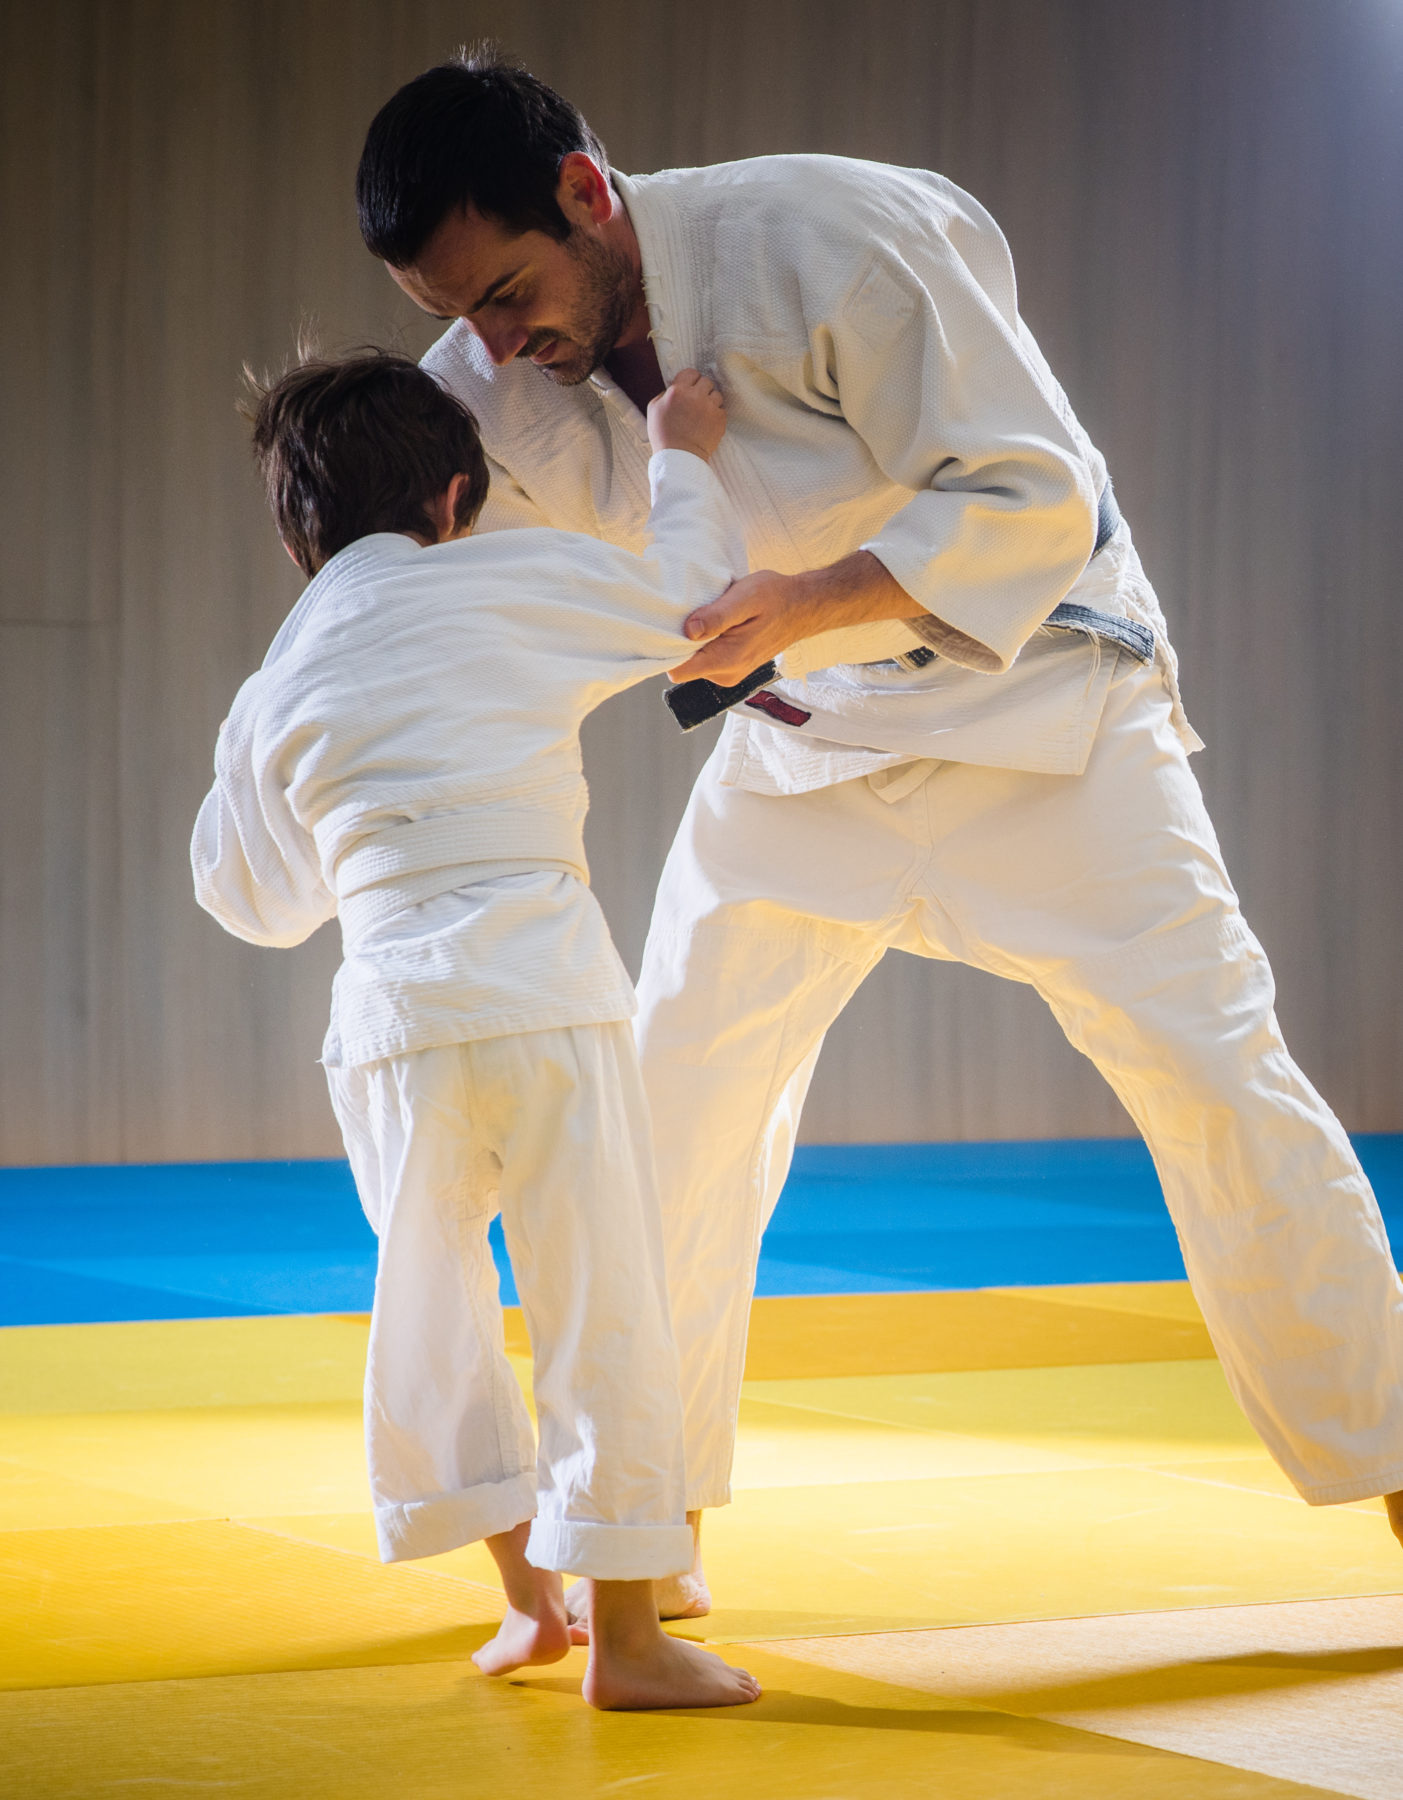 man-and-young-boy-are-training-judo-throw